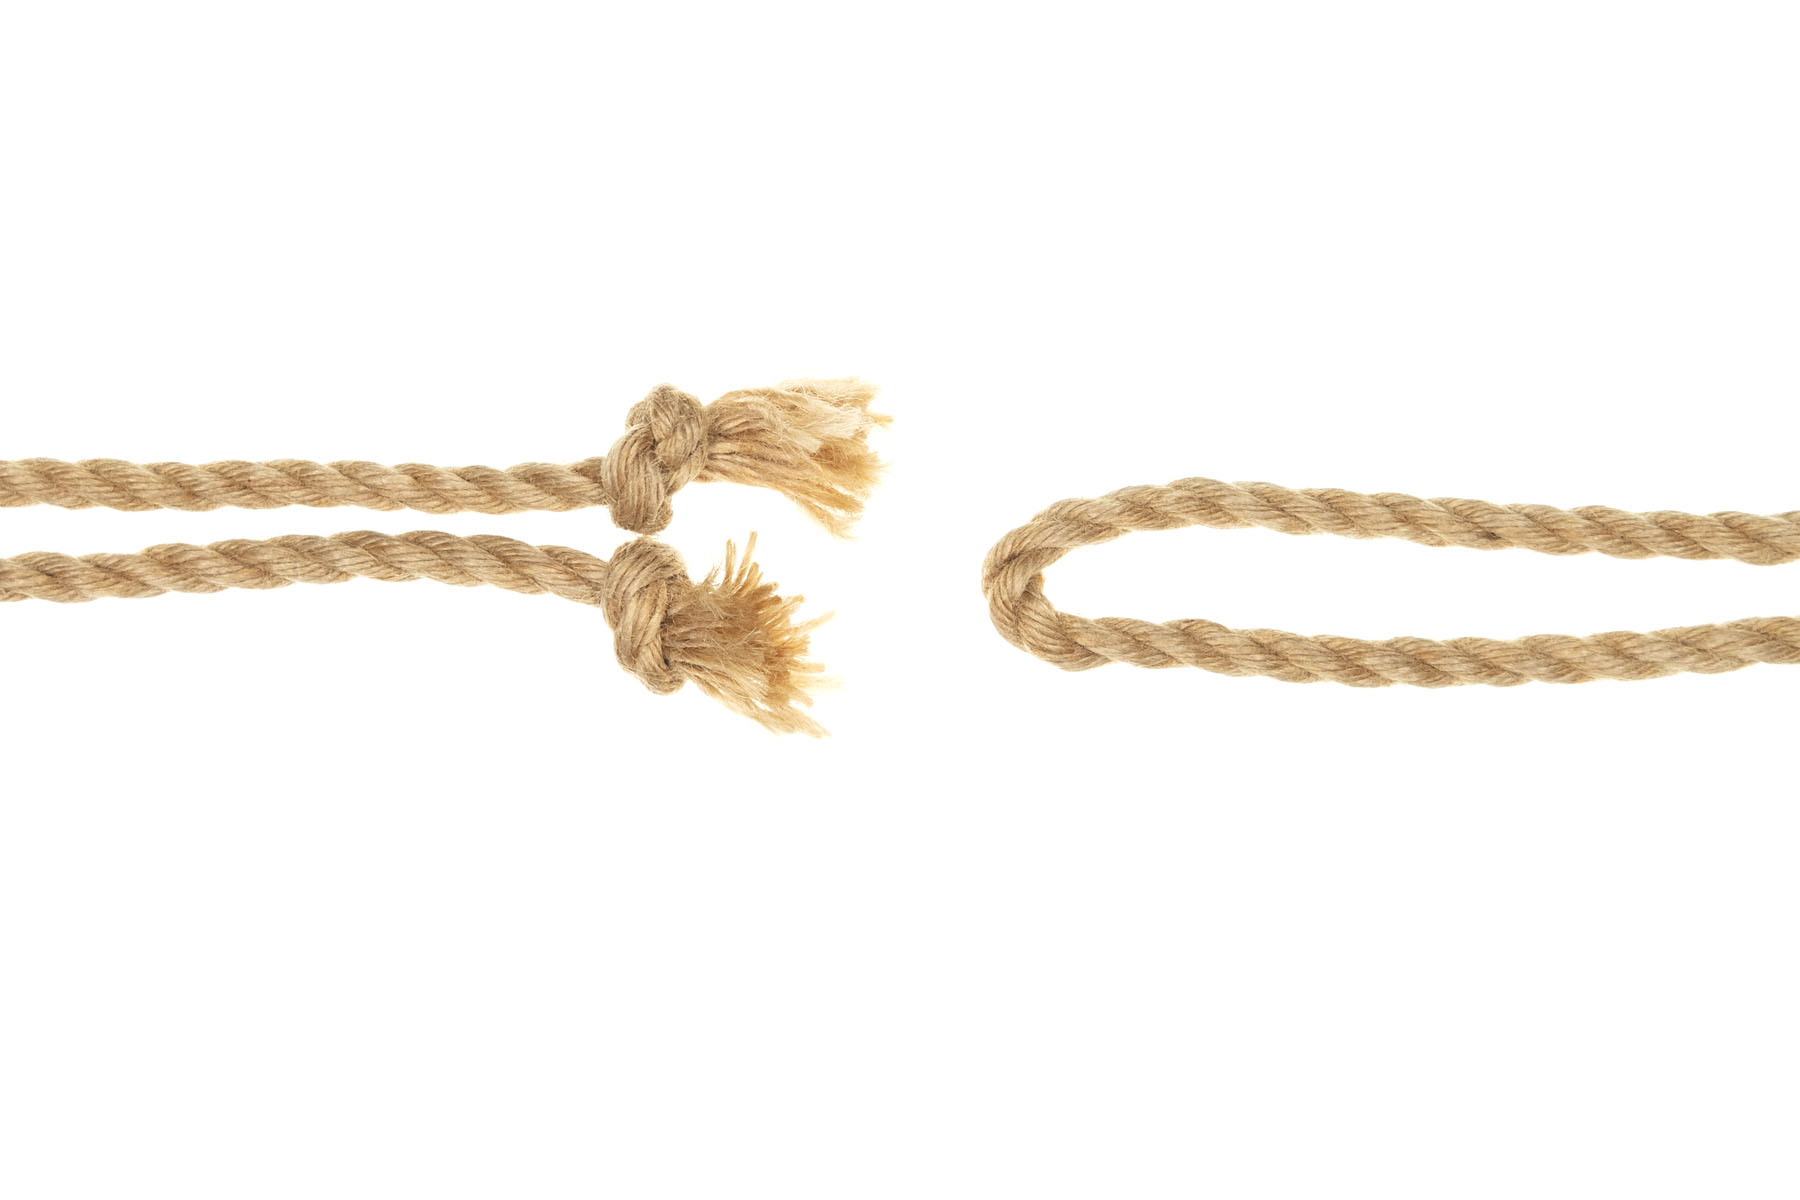 Two single strands of jute rope enter the frame from the left. Both strands have knotted ends. The bight of a doubled length of jute rope enters the frame from the right.